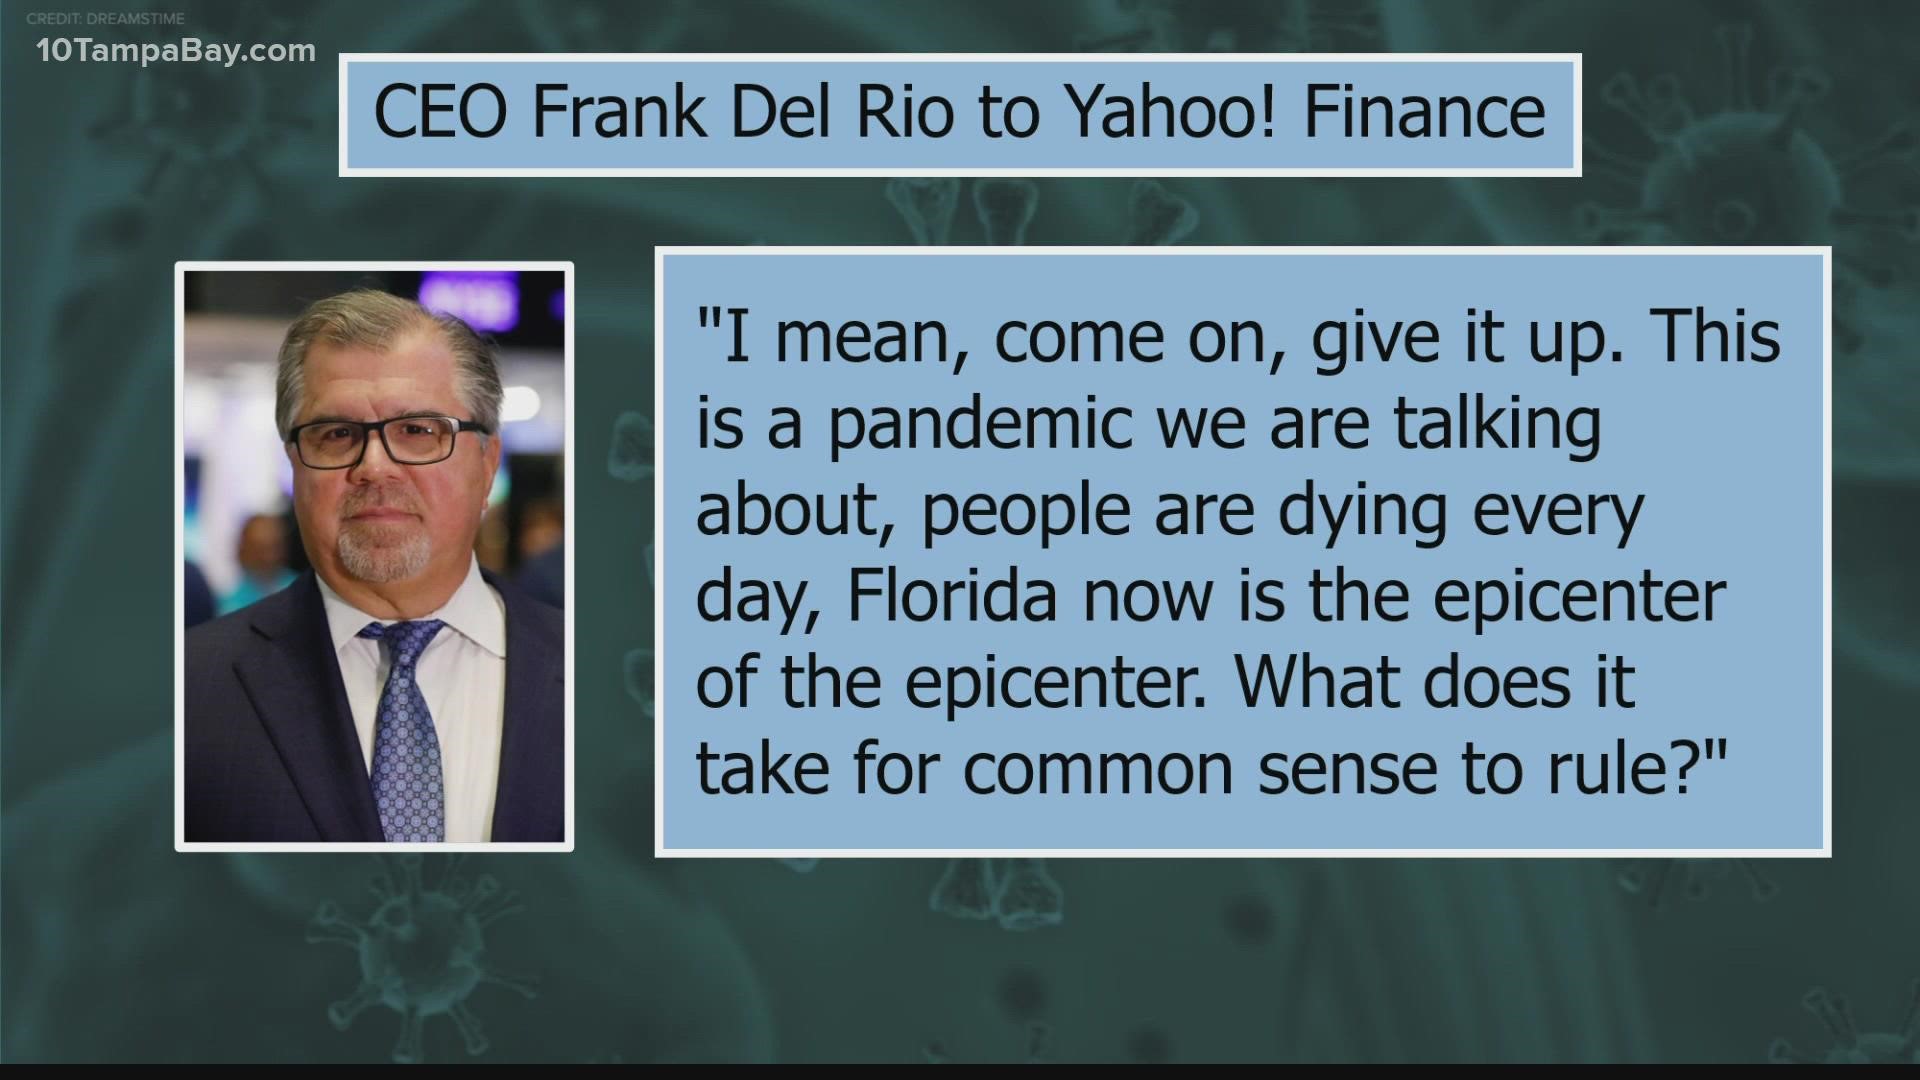 "What does it take for common sense to rule?" Norwegian Cruise Line CEO Frank Del Rio told Yahoo! Finance.